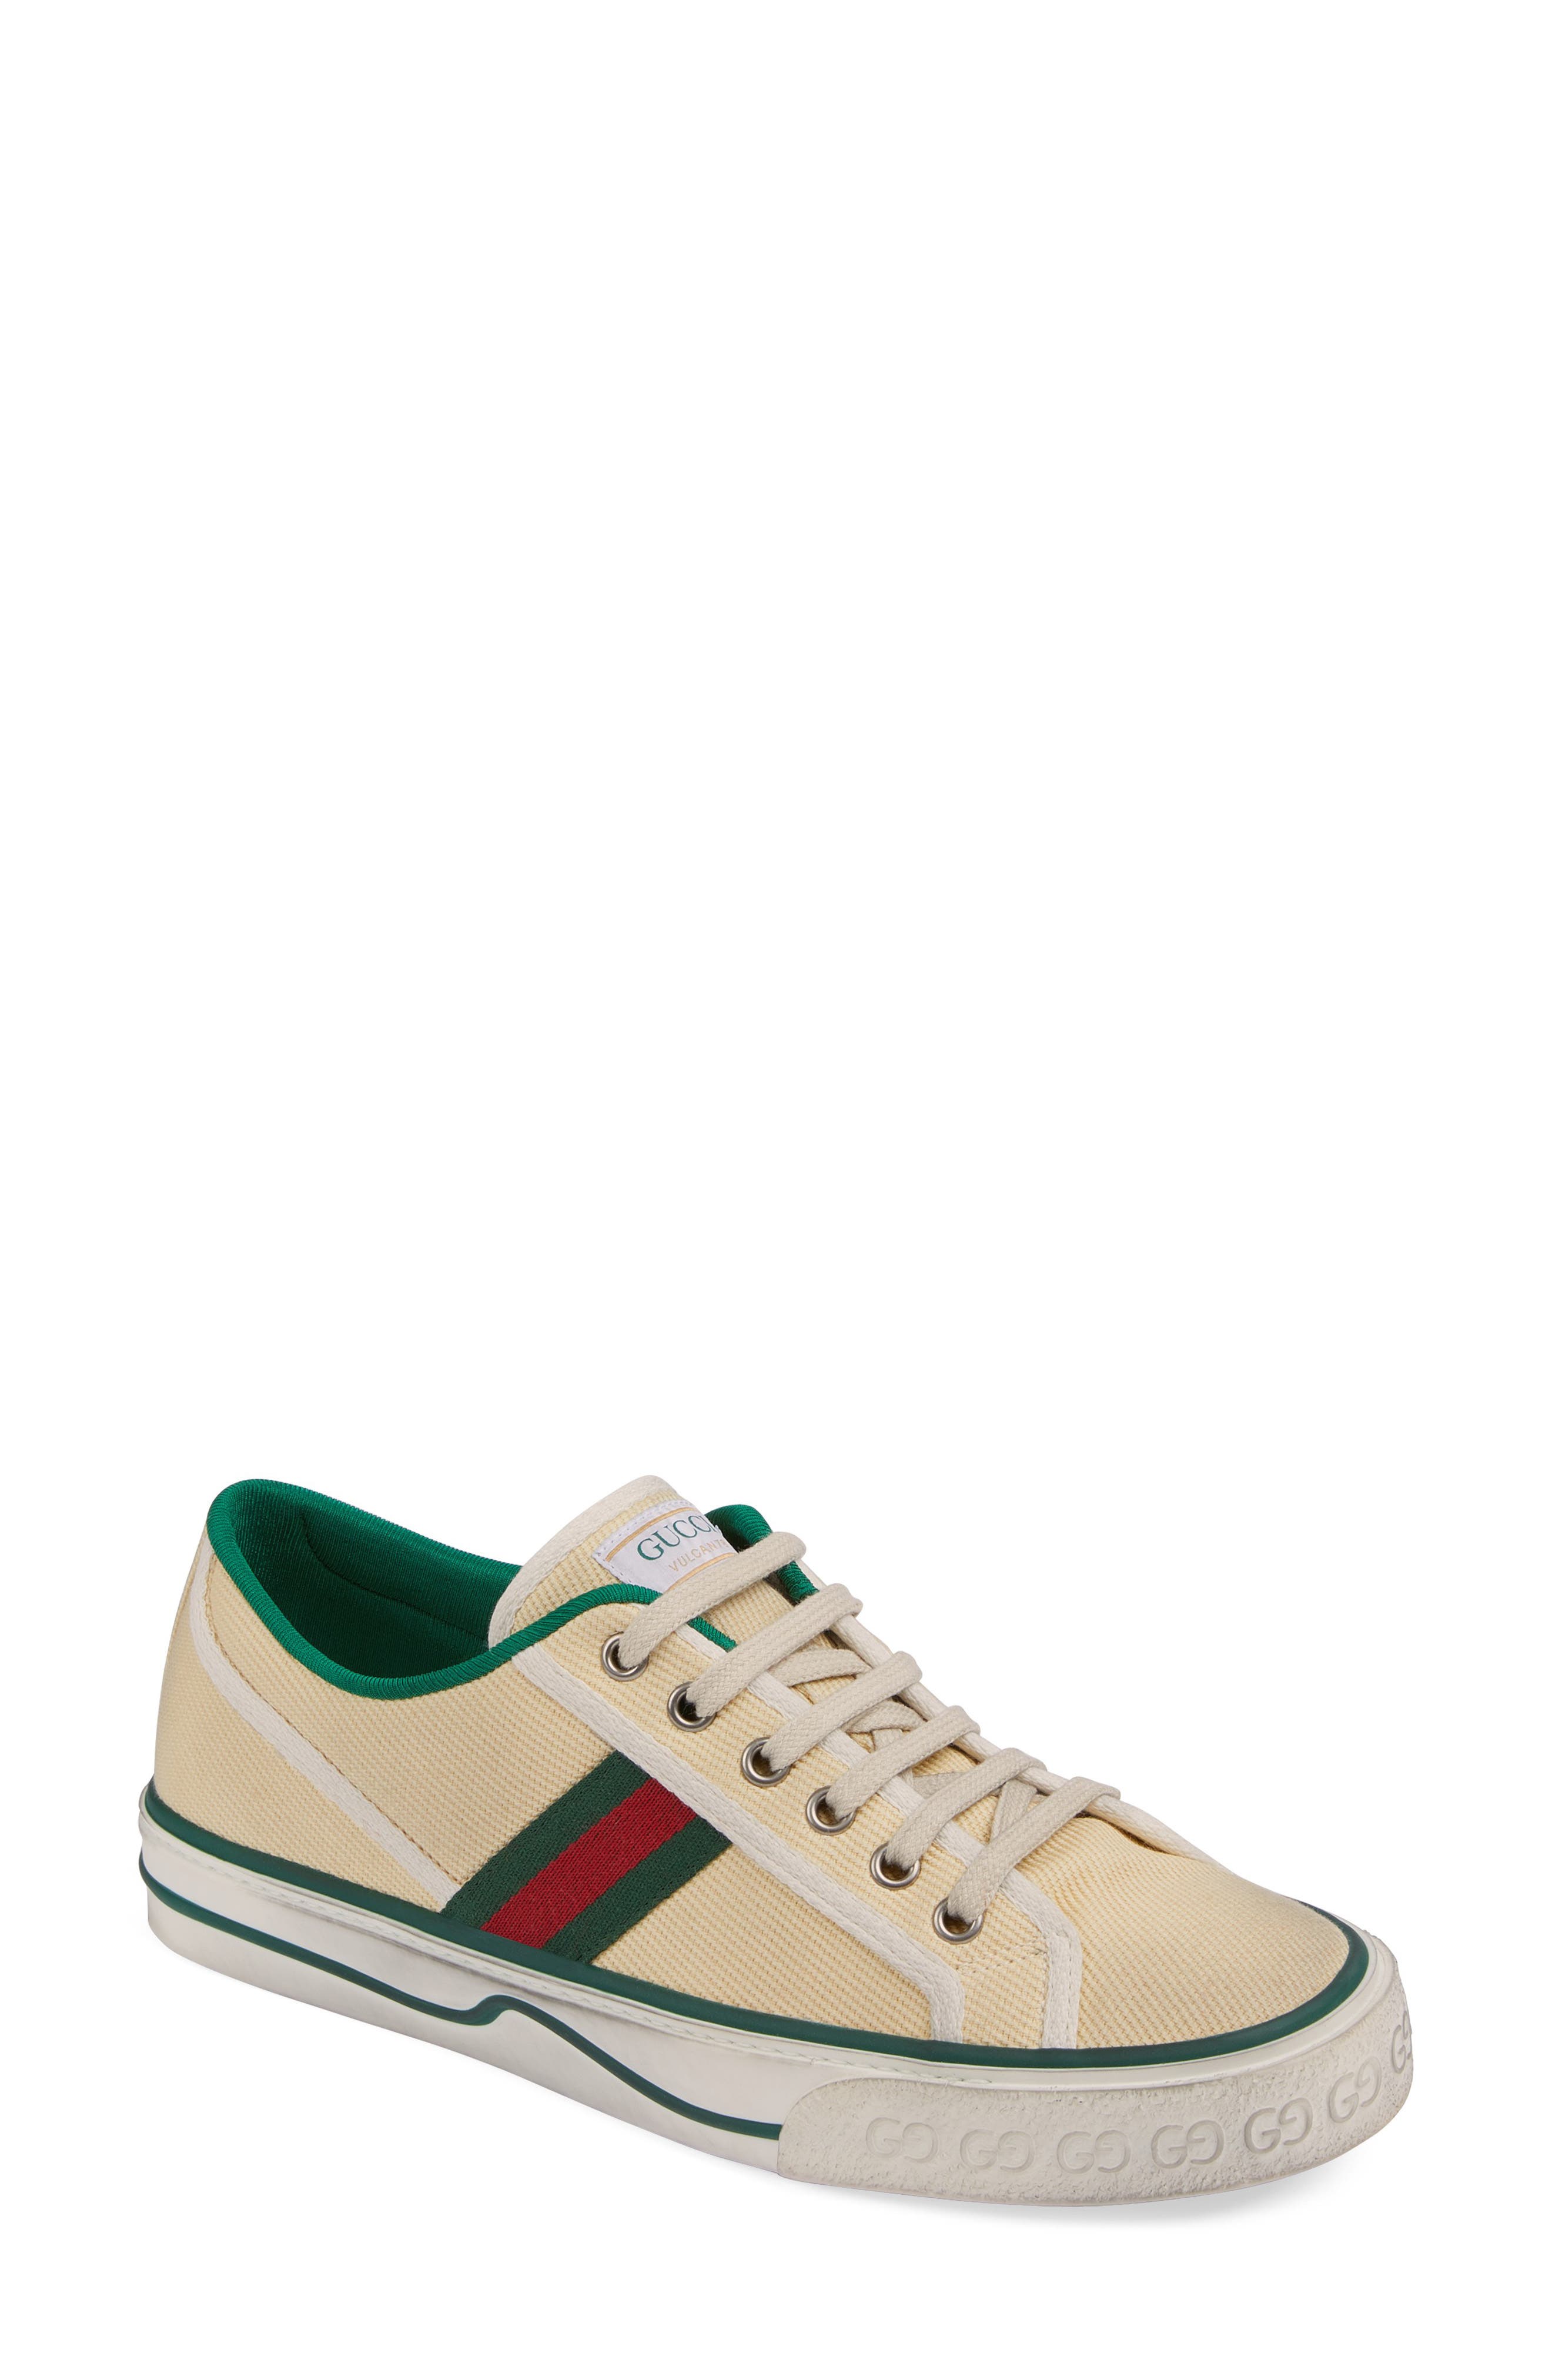 gucci womens shoes clearance